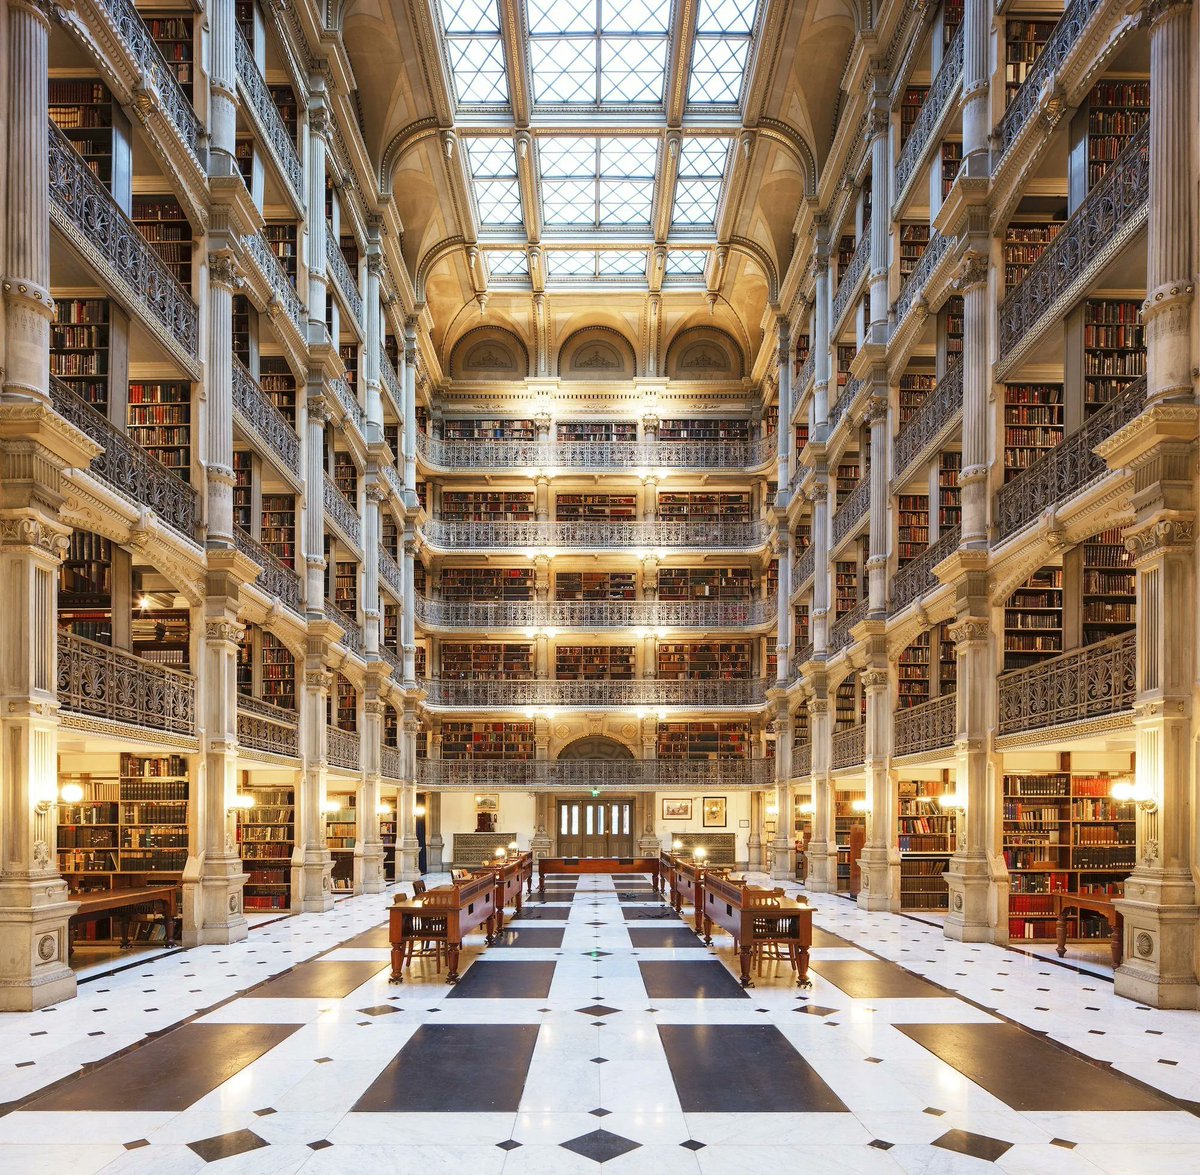 Explore the grandeur of libraries in 'Temples of Books.' M.J. Strauss showcases 40+ global libraries, from Rio's Real Gabinete to Phillips Exeter, as sanctuaries of knowledge in an era of infinite publication. 👉 buff.ly/3IOwkSV